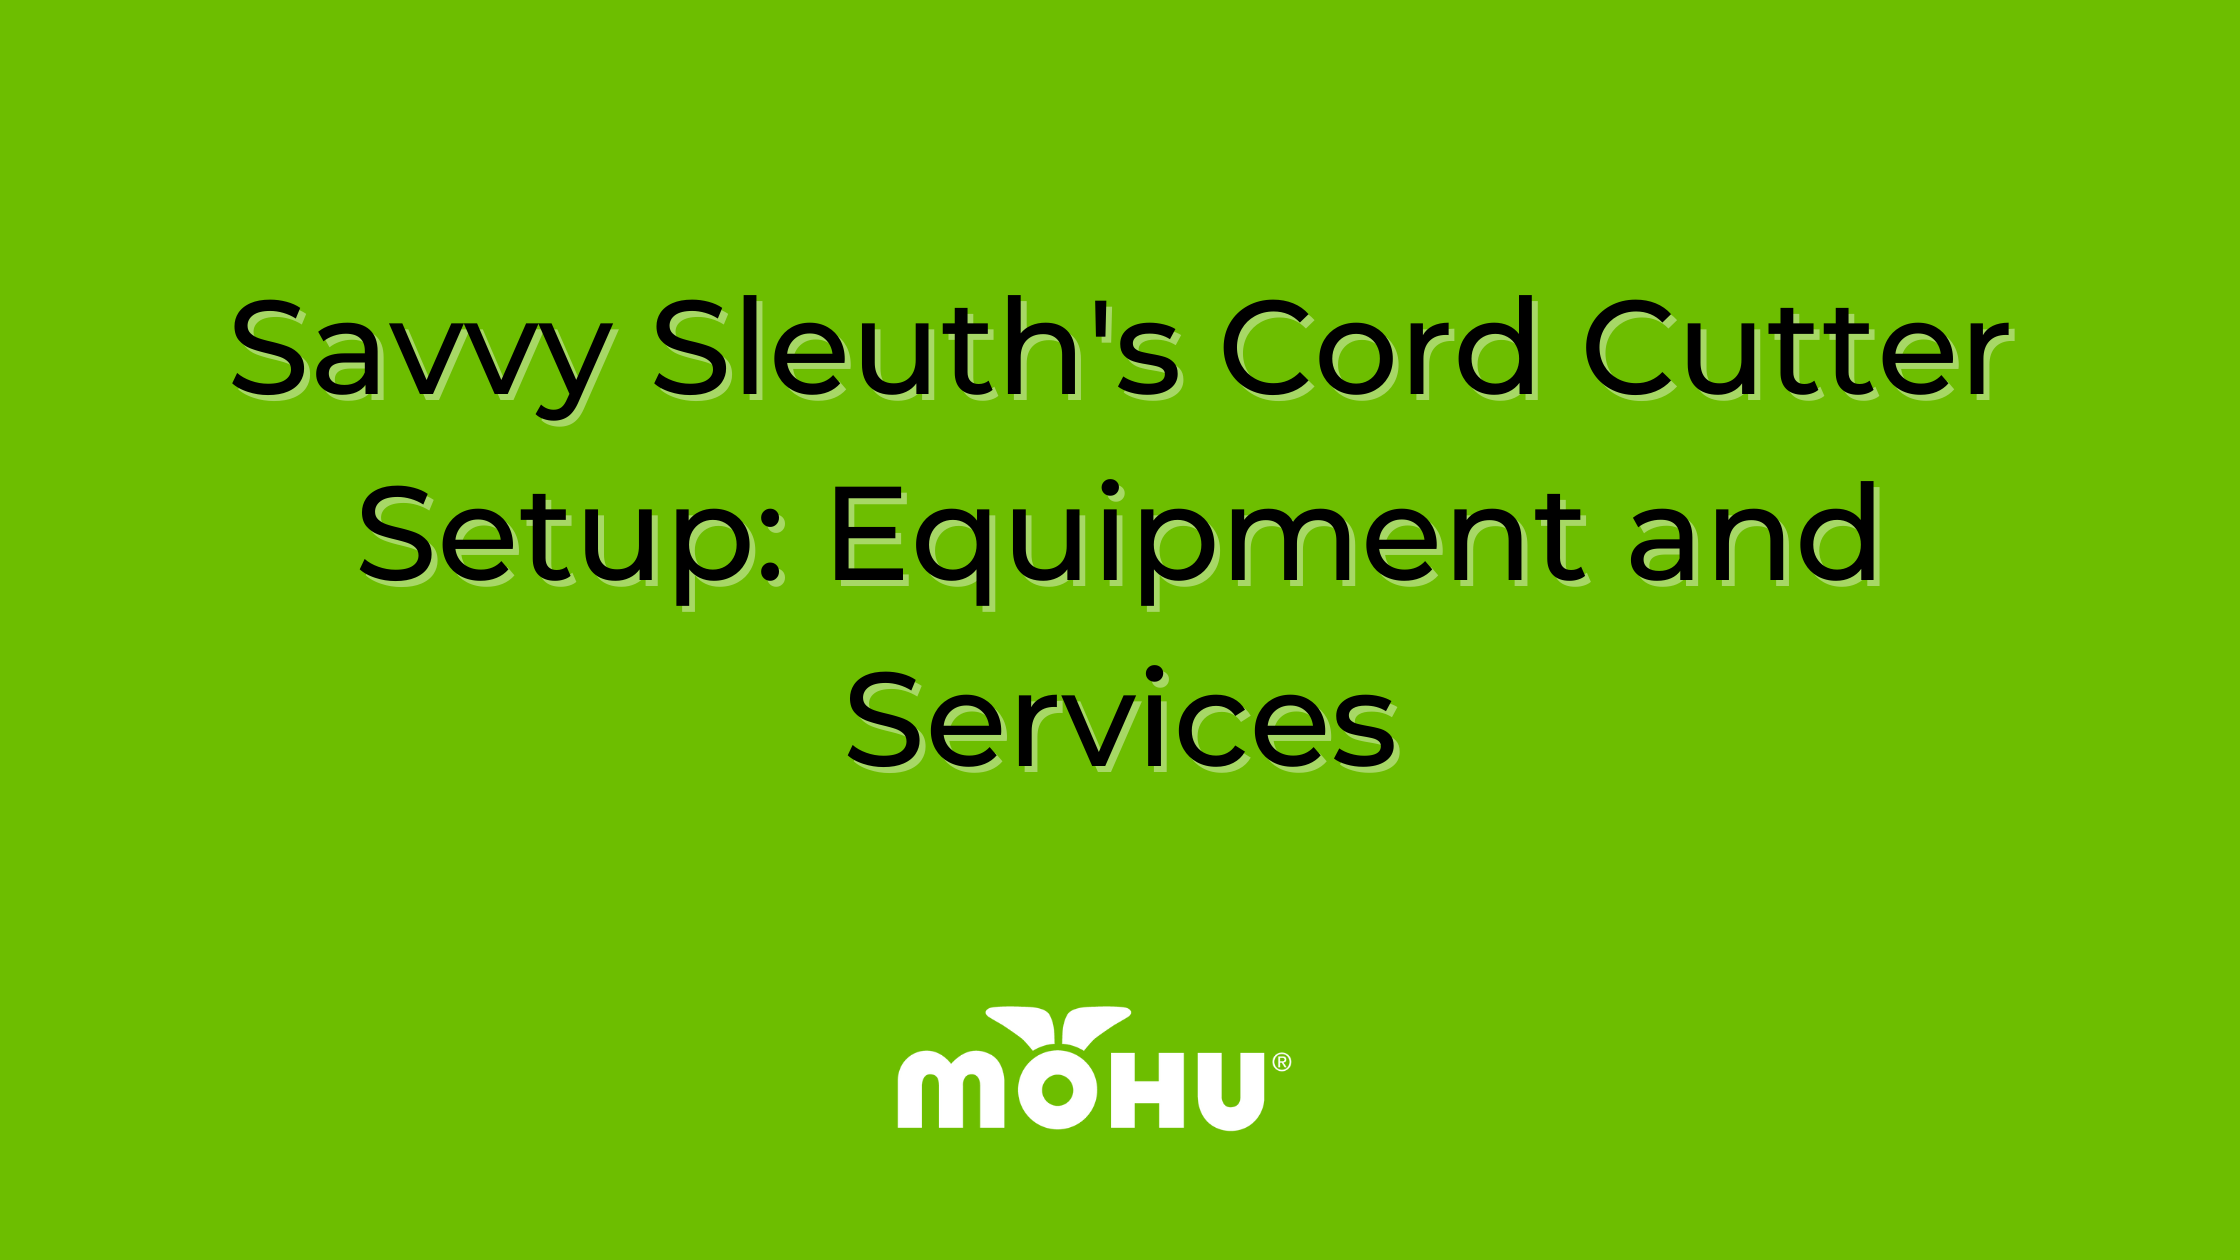 Savvy Sleuth's Cord Cutter Setup Equipment and Services, Mohu